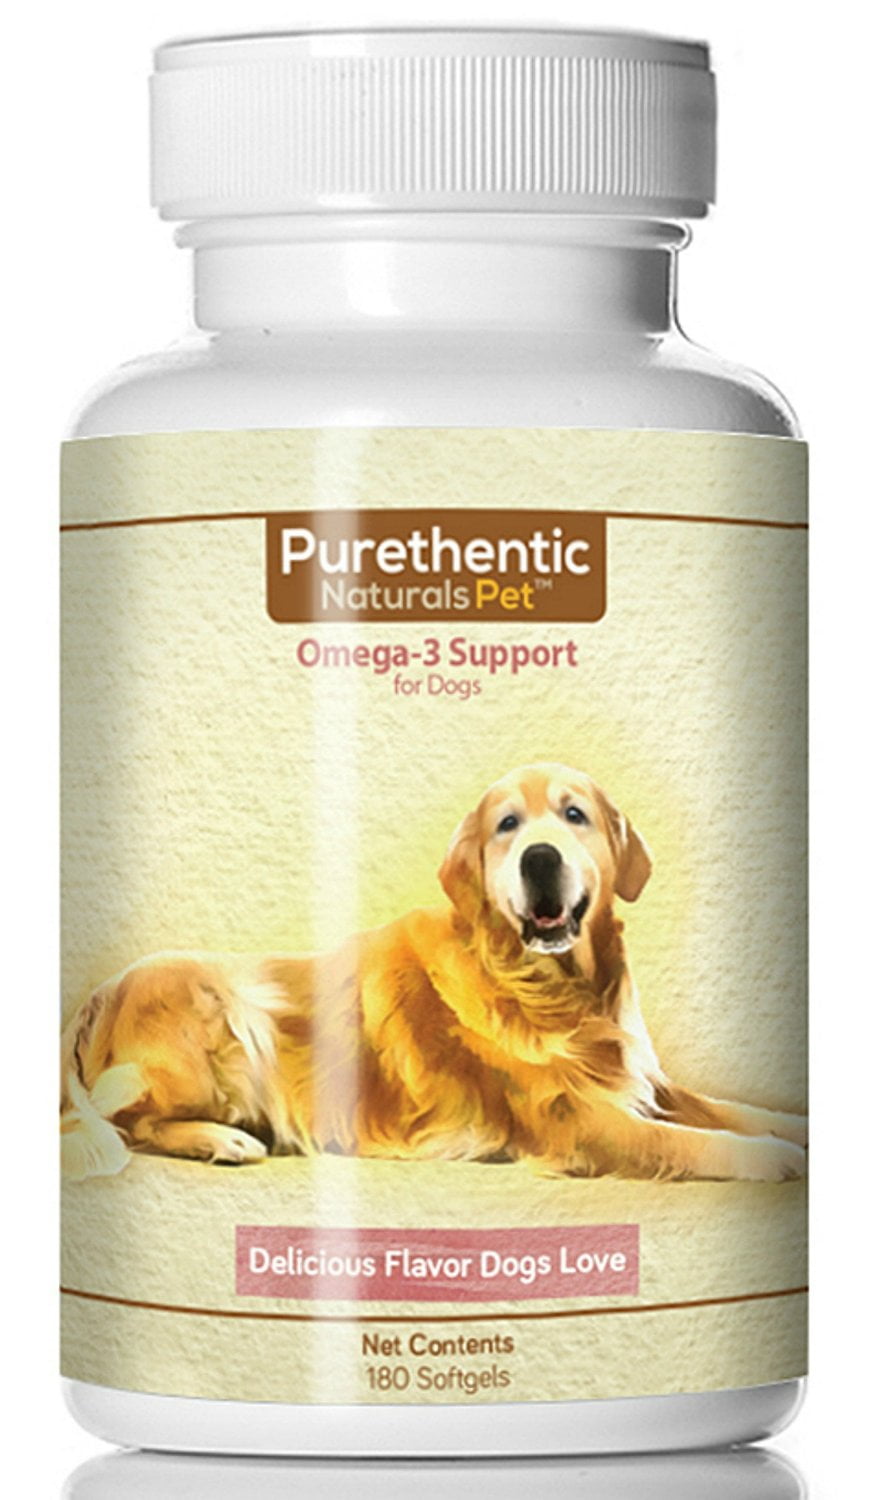 buy fish oil for dogs